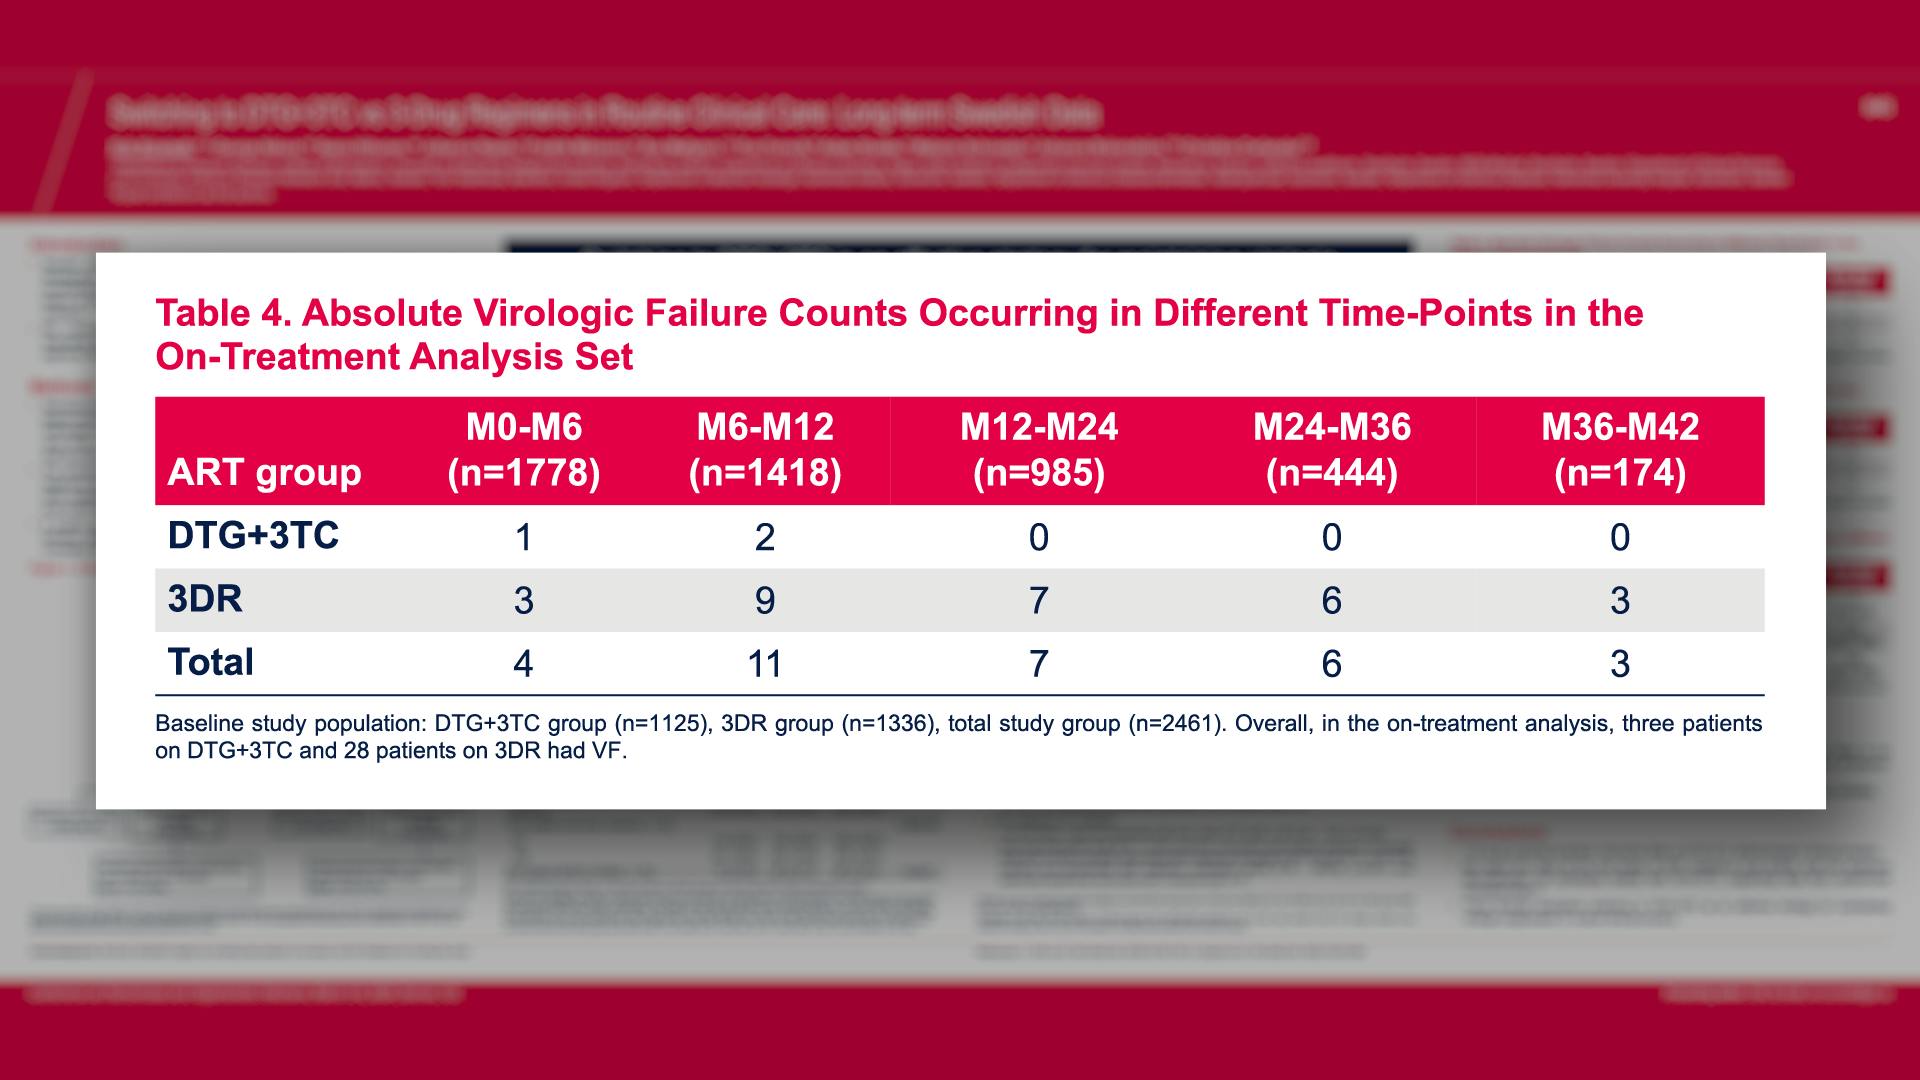 Absolute Virologic Failure Counts Occurring in Different Time-Points in the On-Treatment Analysis Set